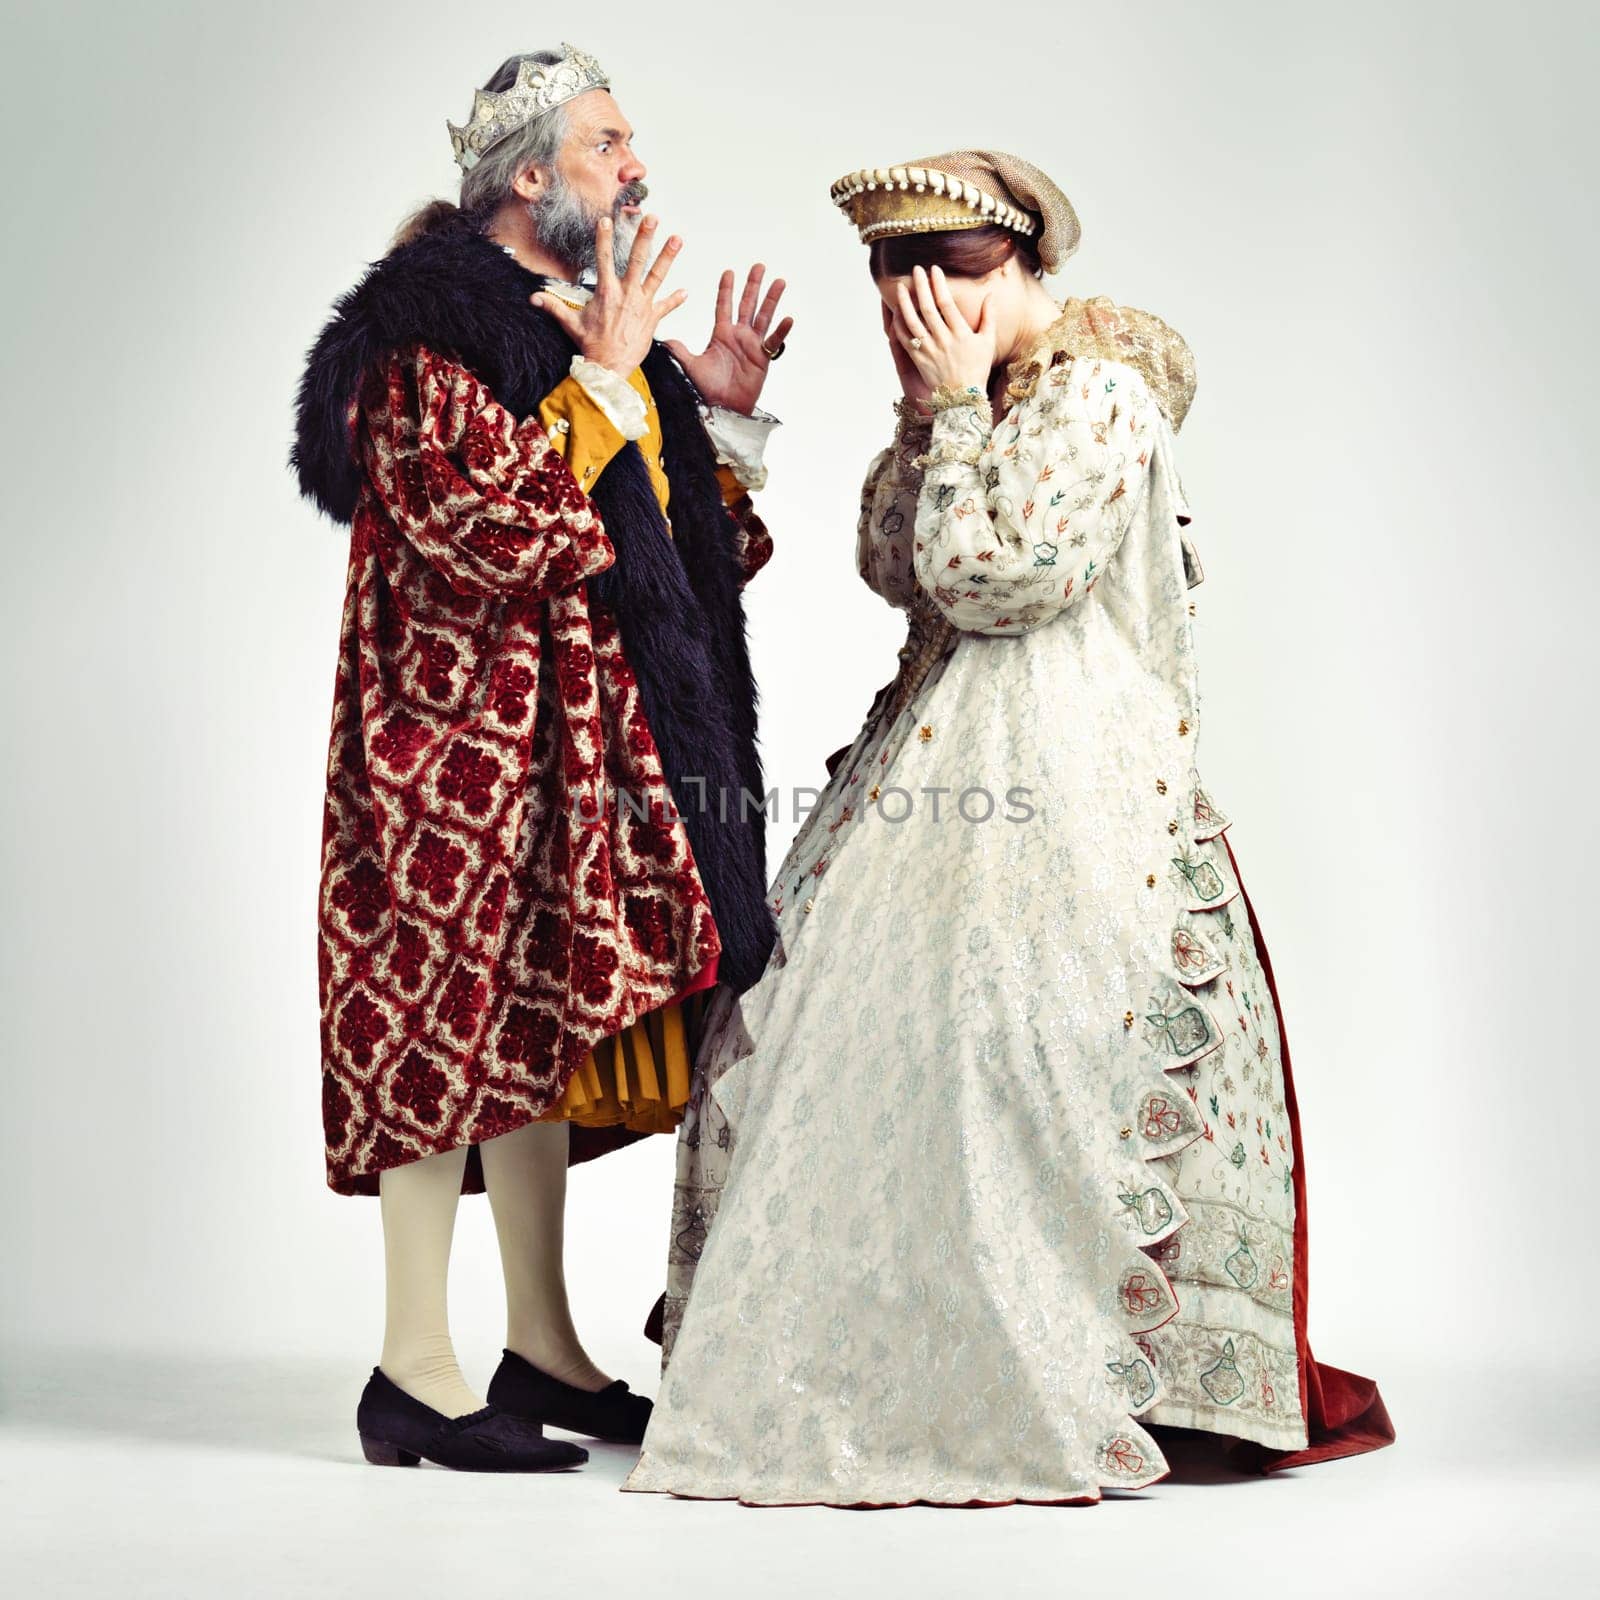 King man, queen and argue in studio with anger, frustrated and crying in relationship, theater and drama. Medieval royal couple, fight and conflict conversation in renaissance, stress and woman cry.